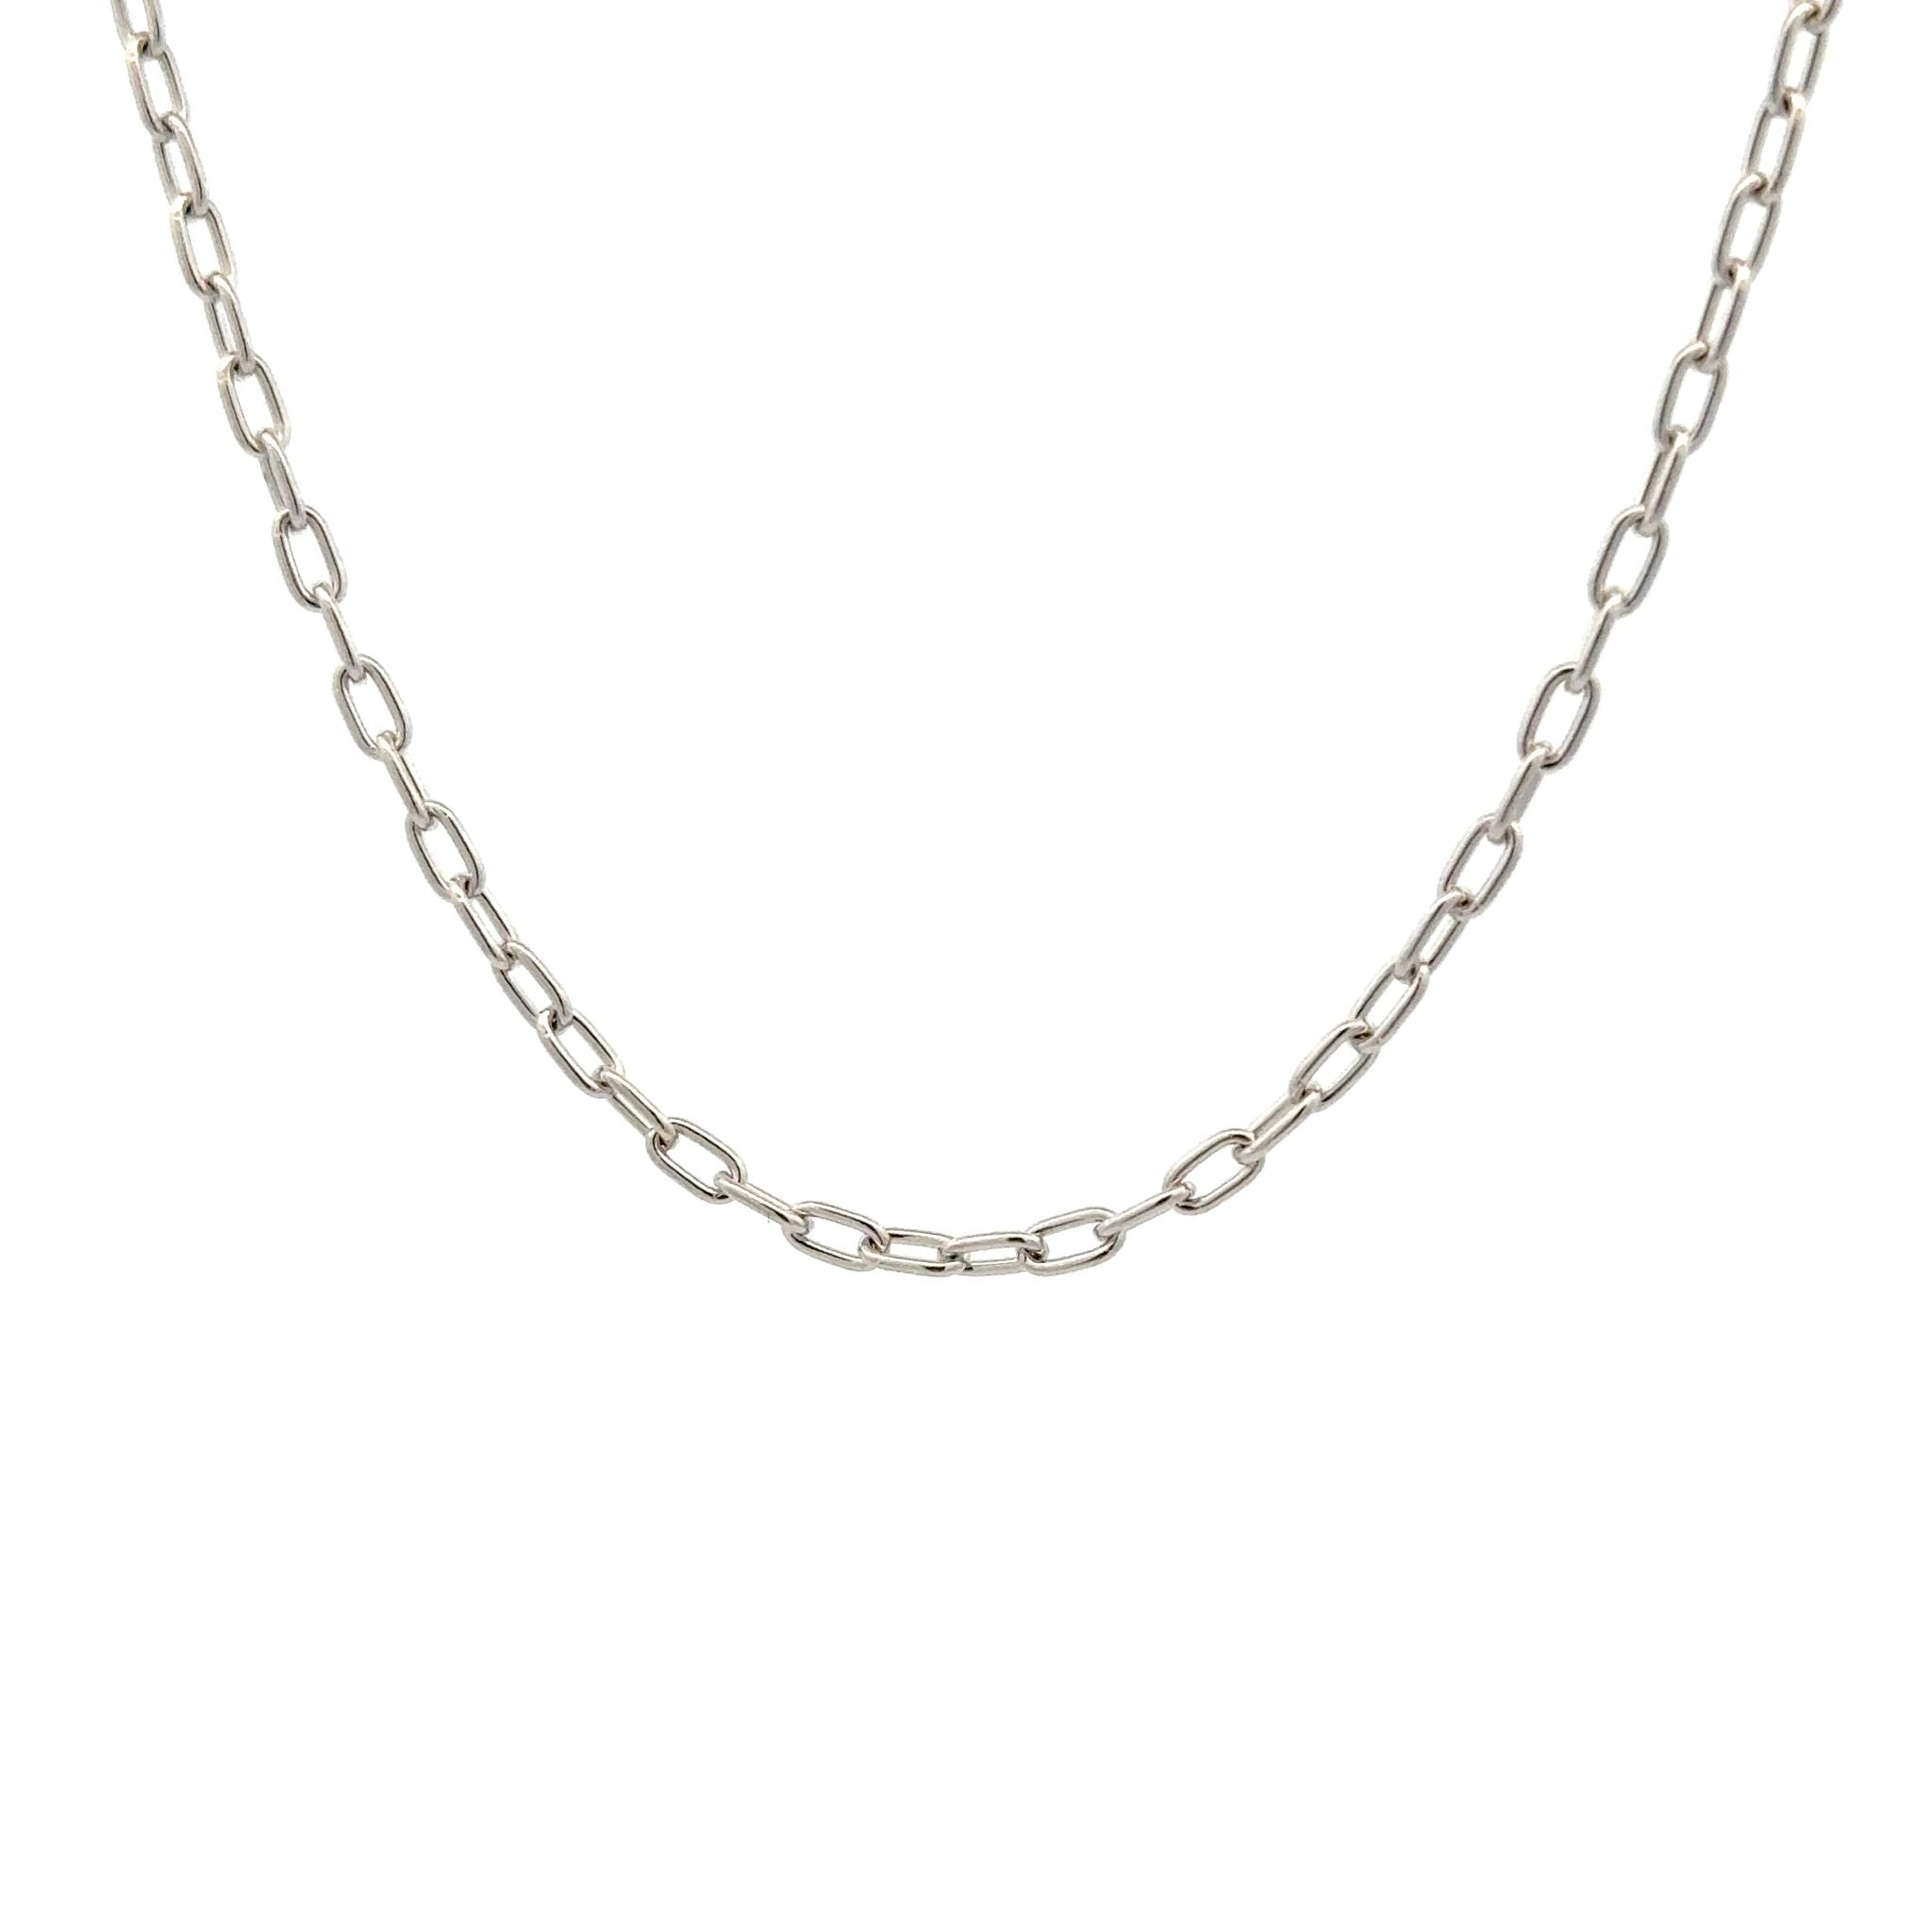 9K White Gold Polished 50cm Elongated Trace Chain 2.3mm